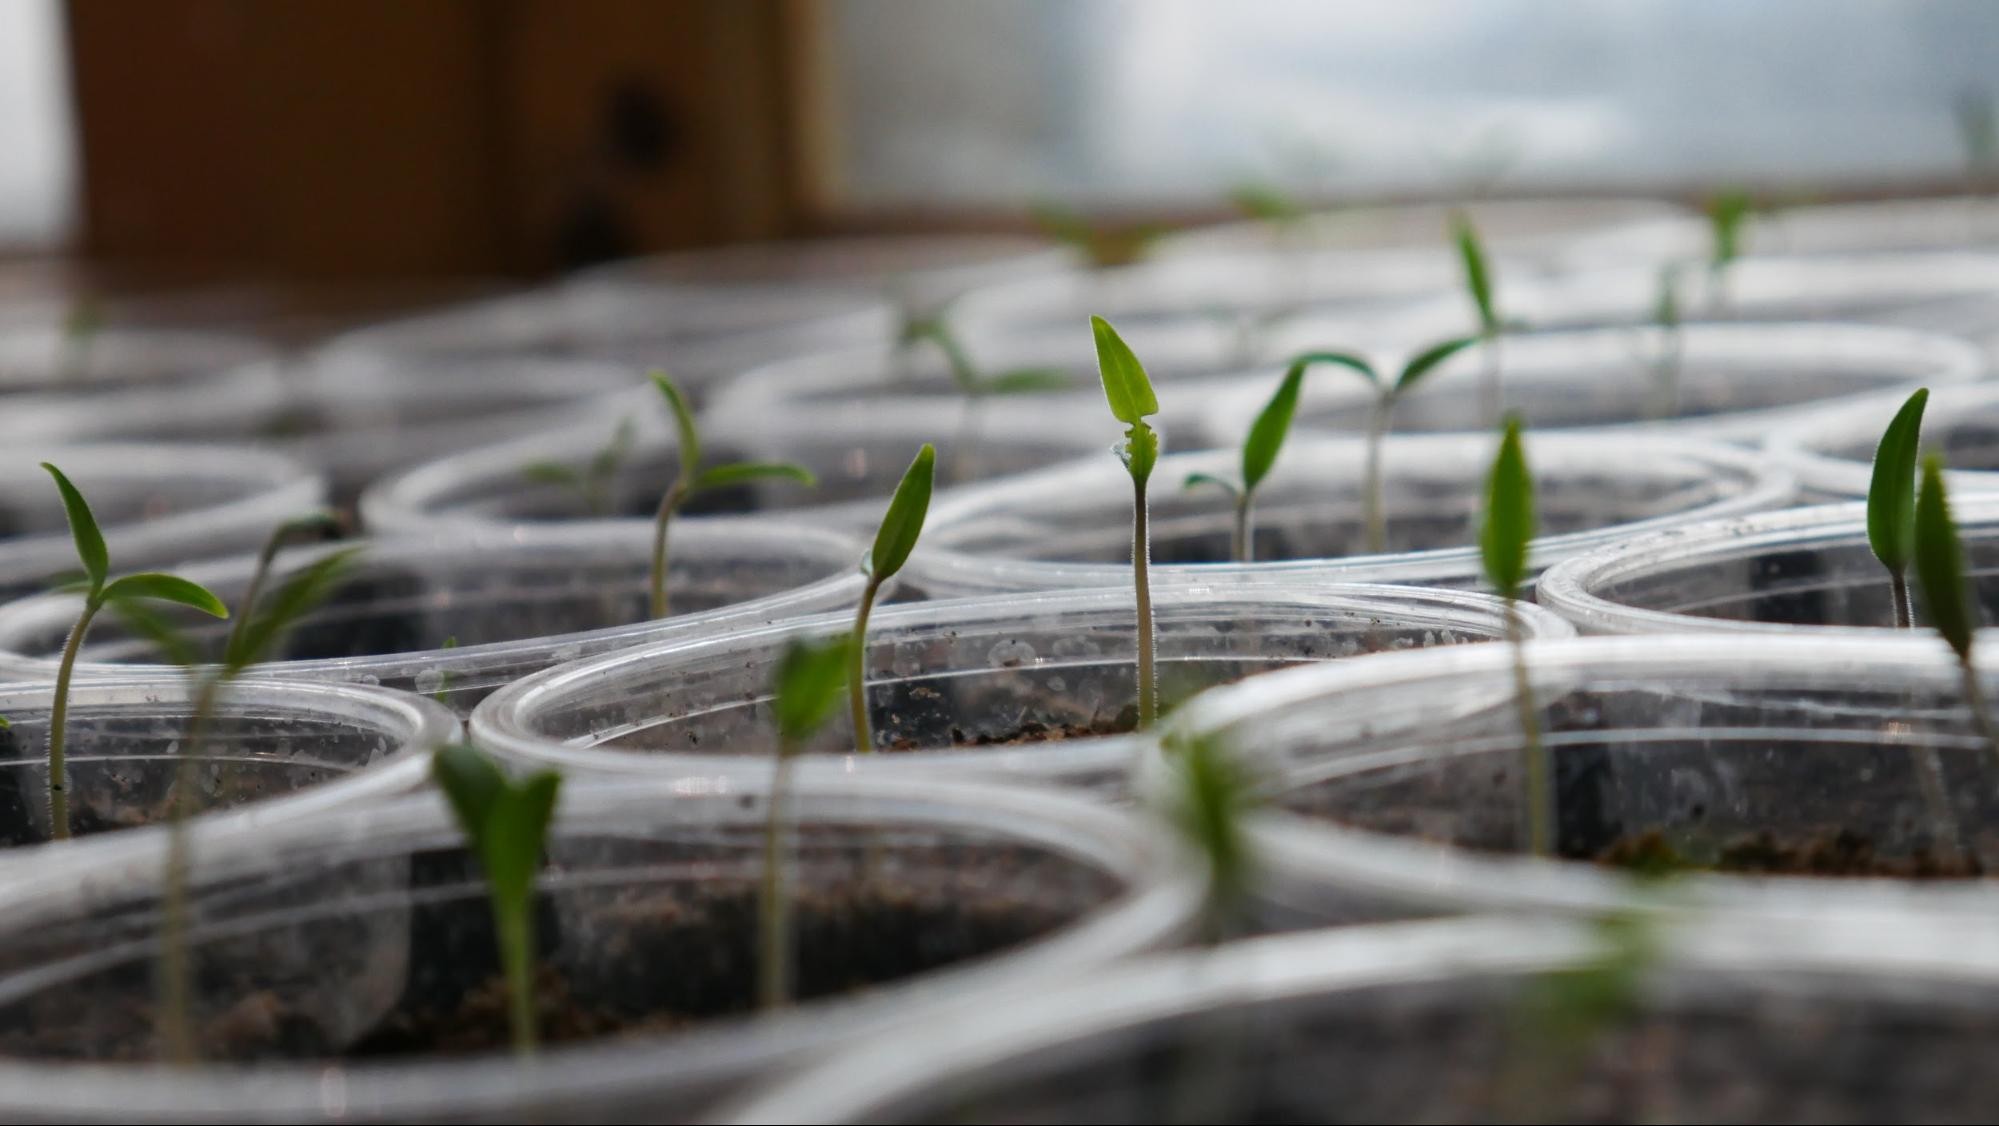 Seedlings grow in jars as part of an earth day activity.